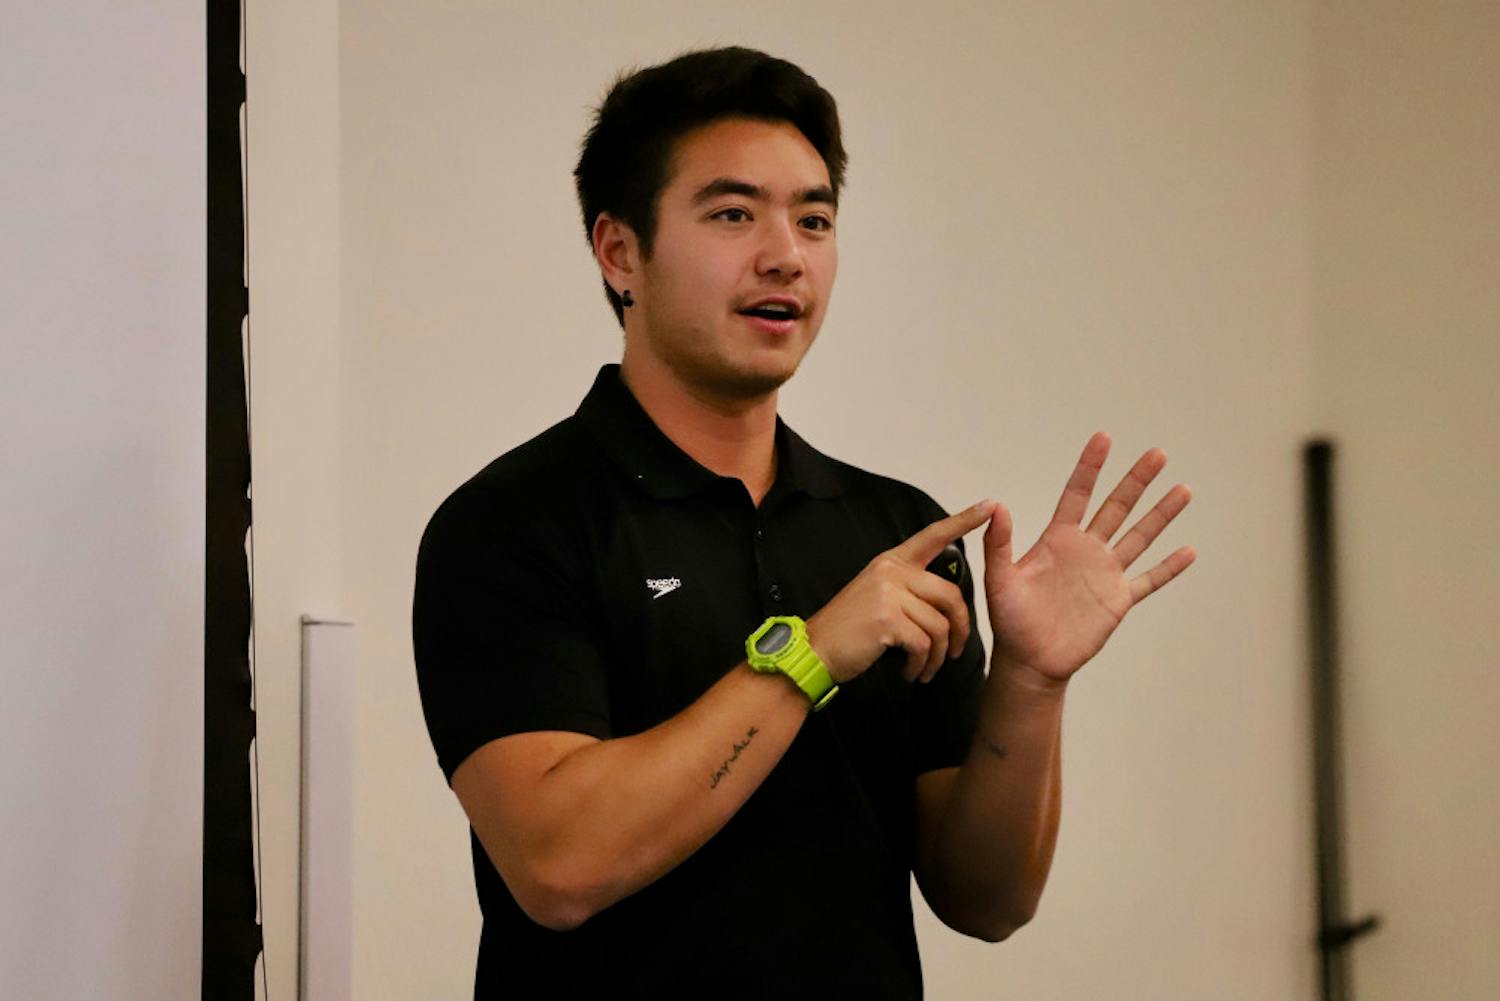 Schuyler Bailar, 23, the first Division 1 NCAA trans-athlete speaks about his life Friday to students. His speech marked the culmination of events put on by Pride Student Union celebrating National Coming Out Day.